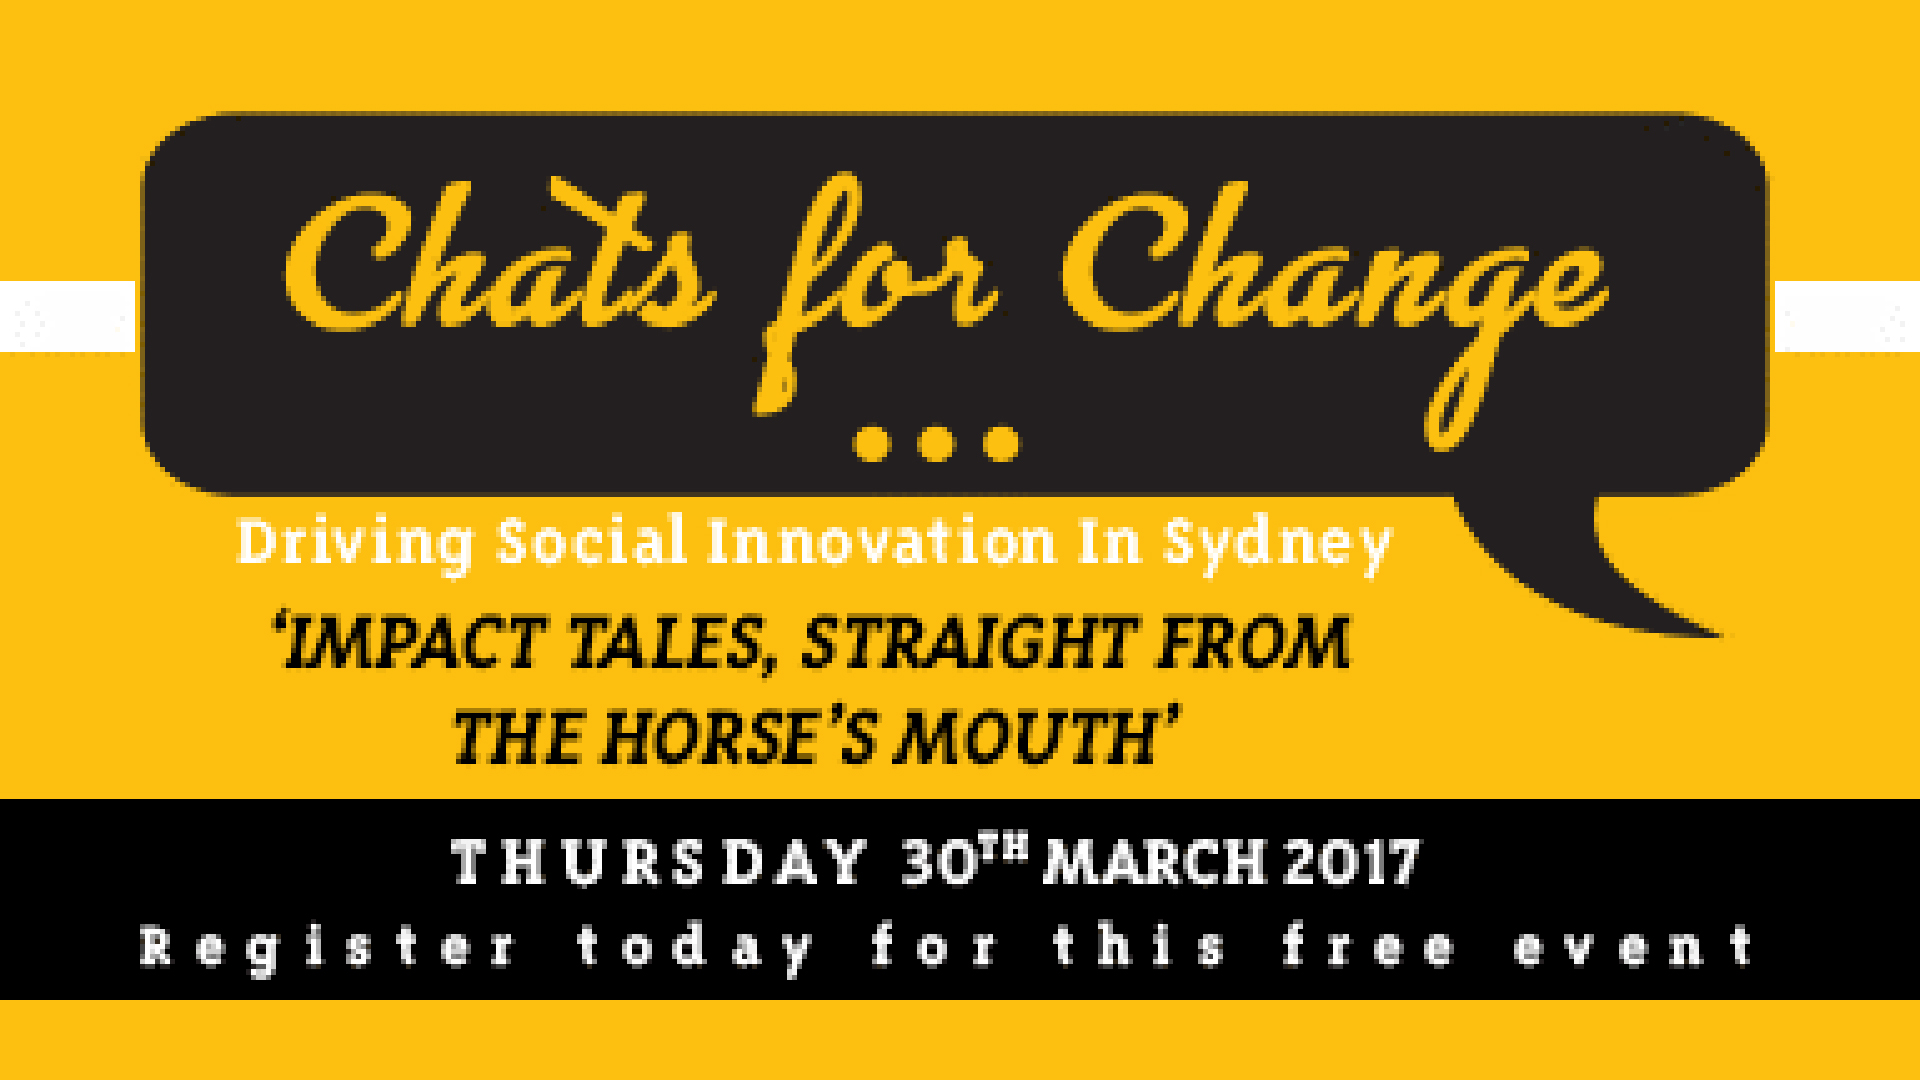 Chats for Change: Impact Tales, Straight from the Horse’s Mouth – Coming Soon